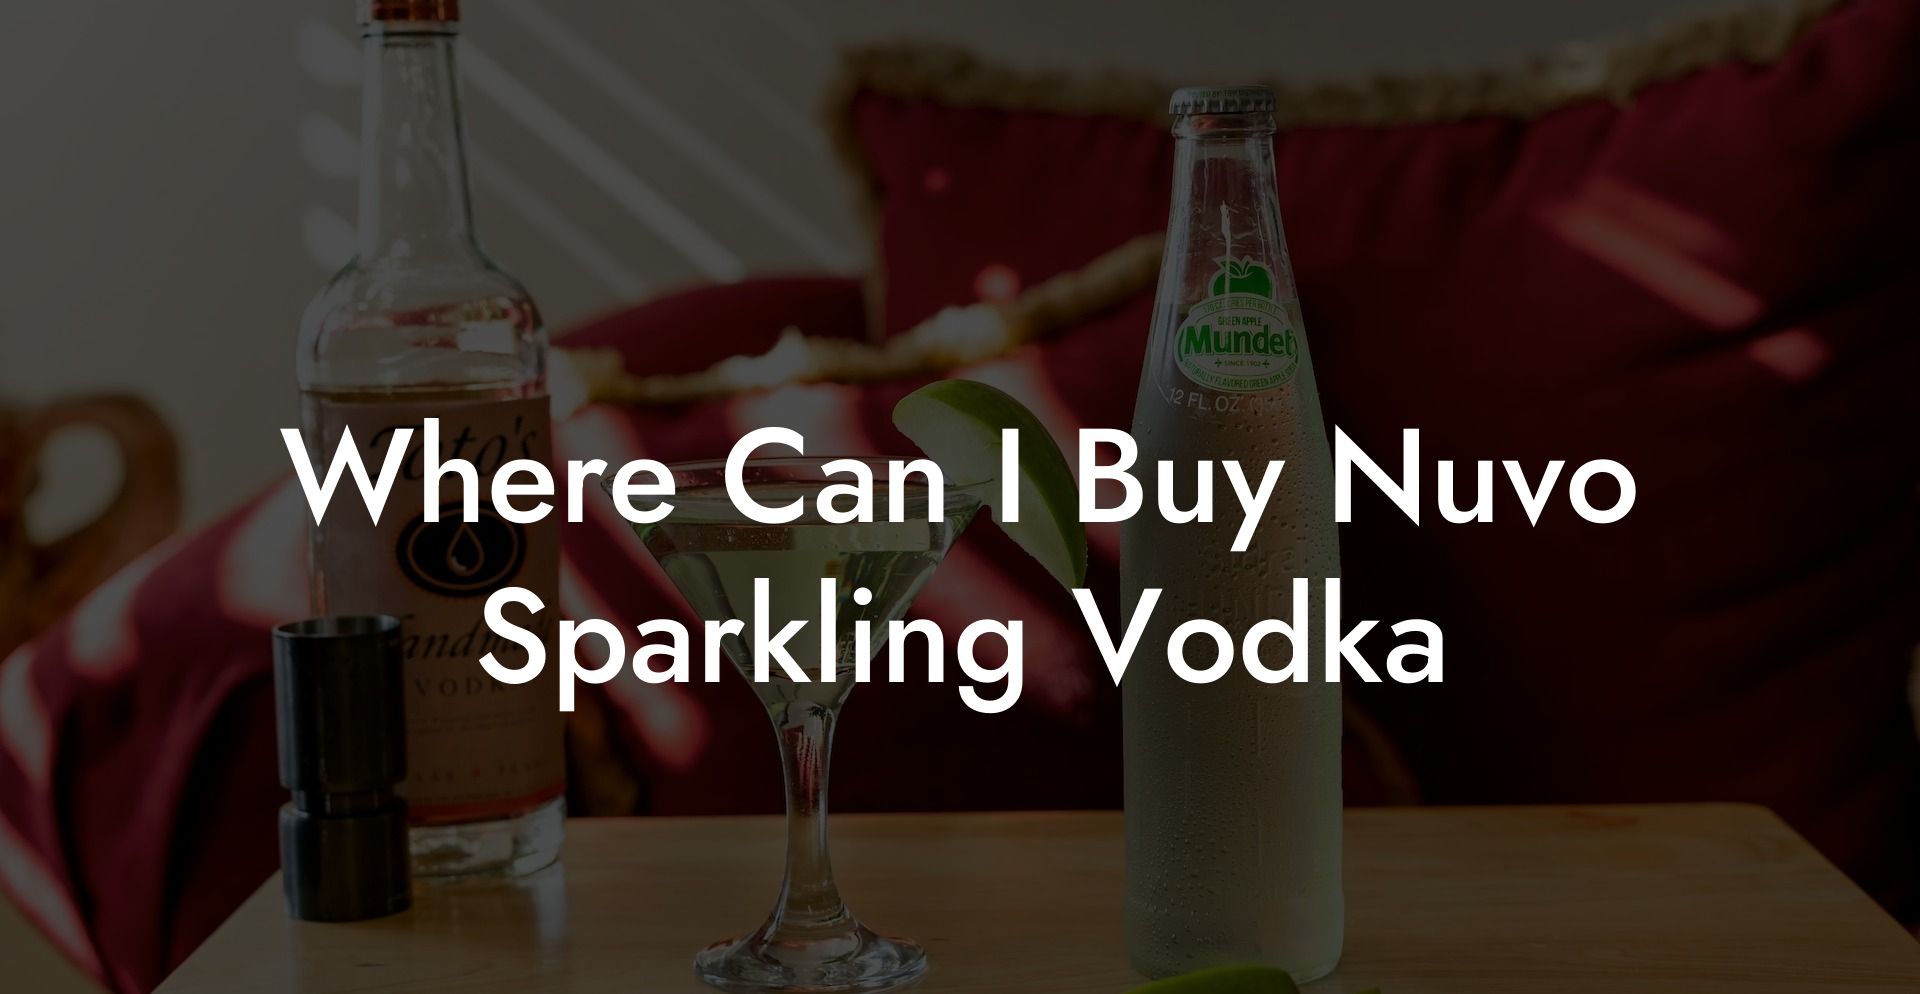 Where Can I Buy Nuvo Sparkling Vodka